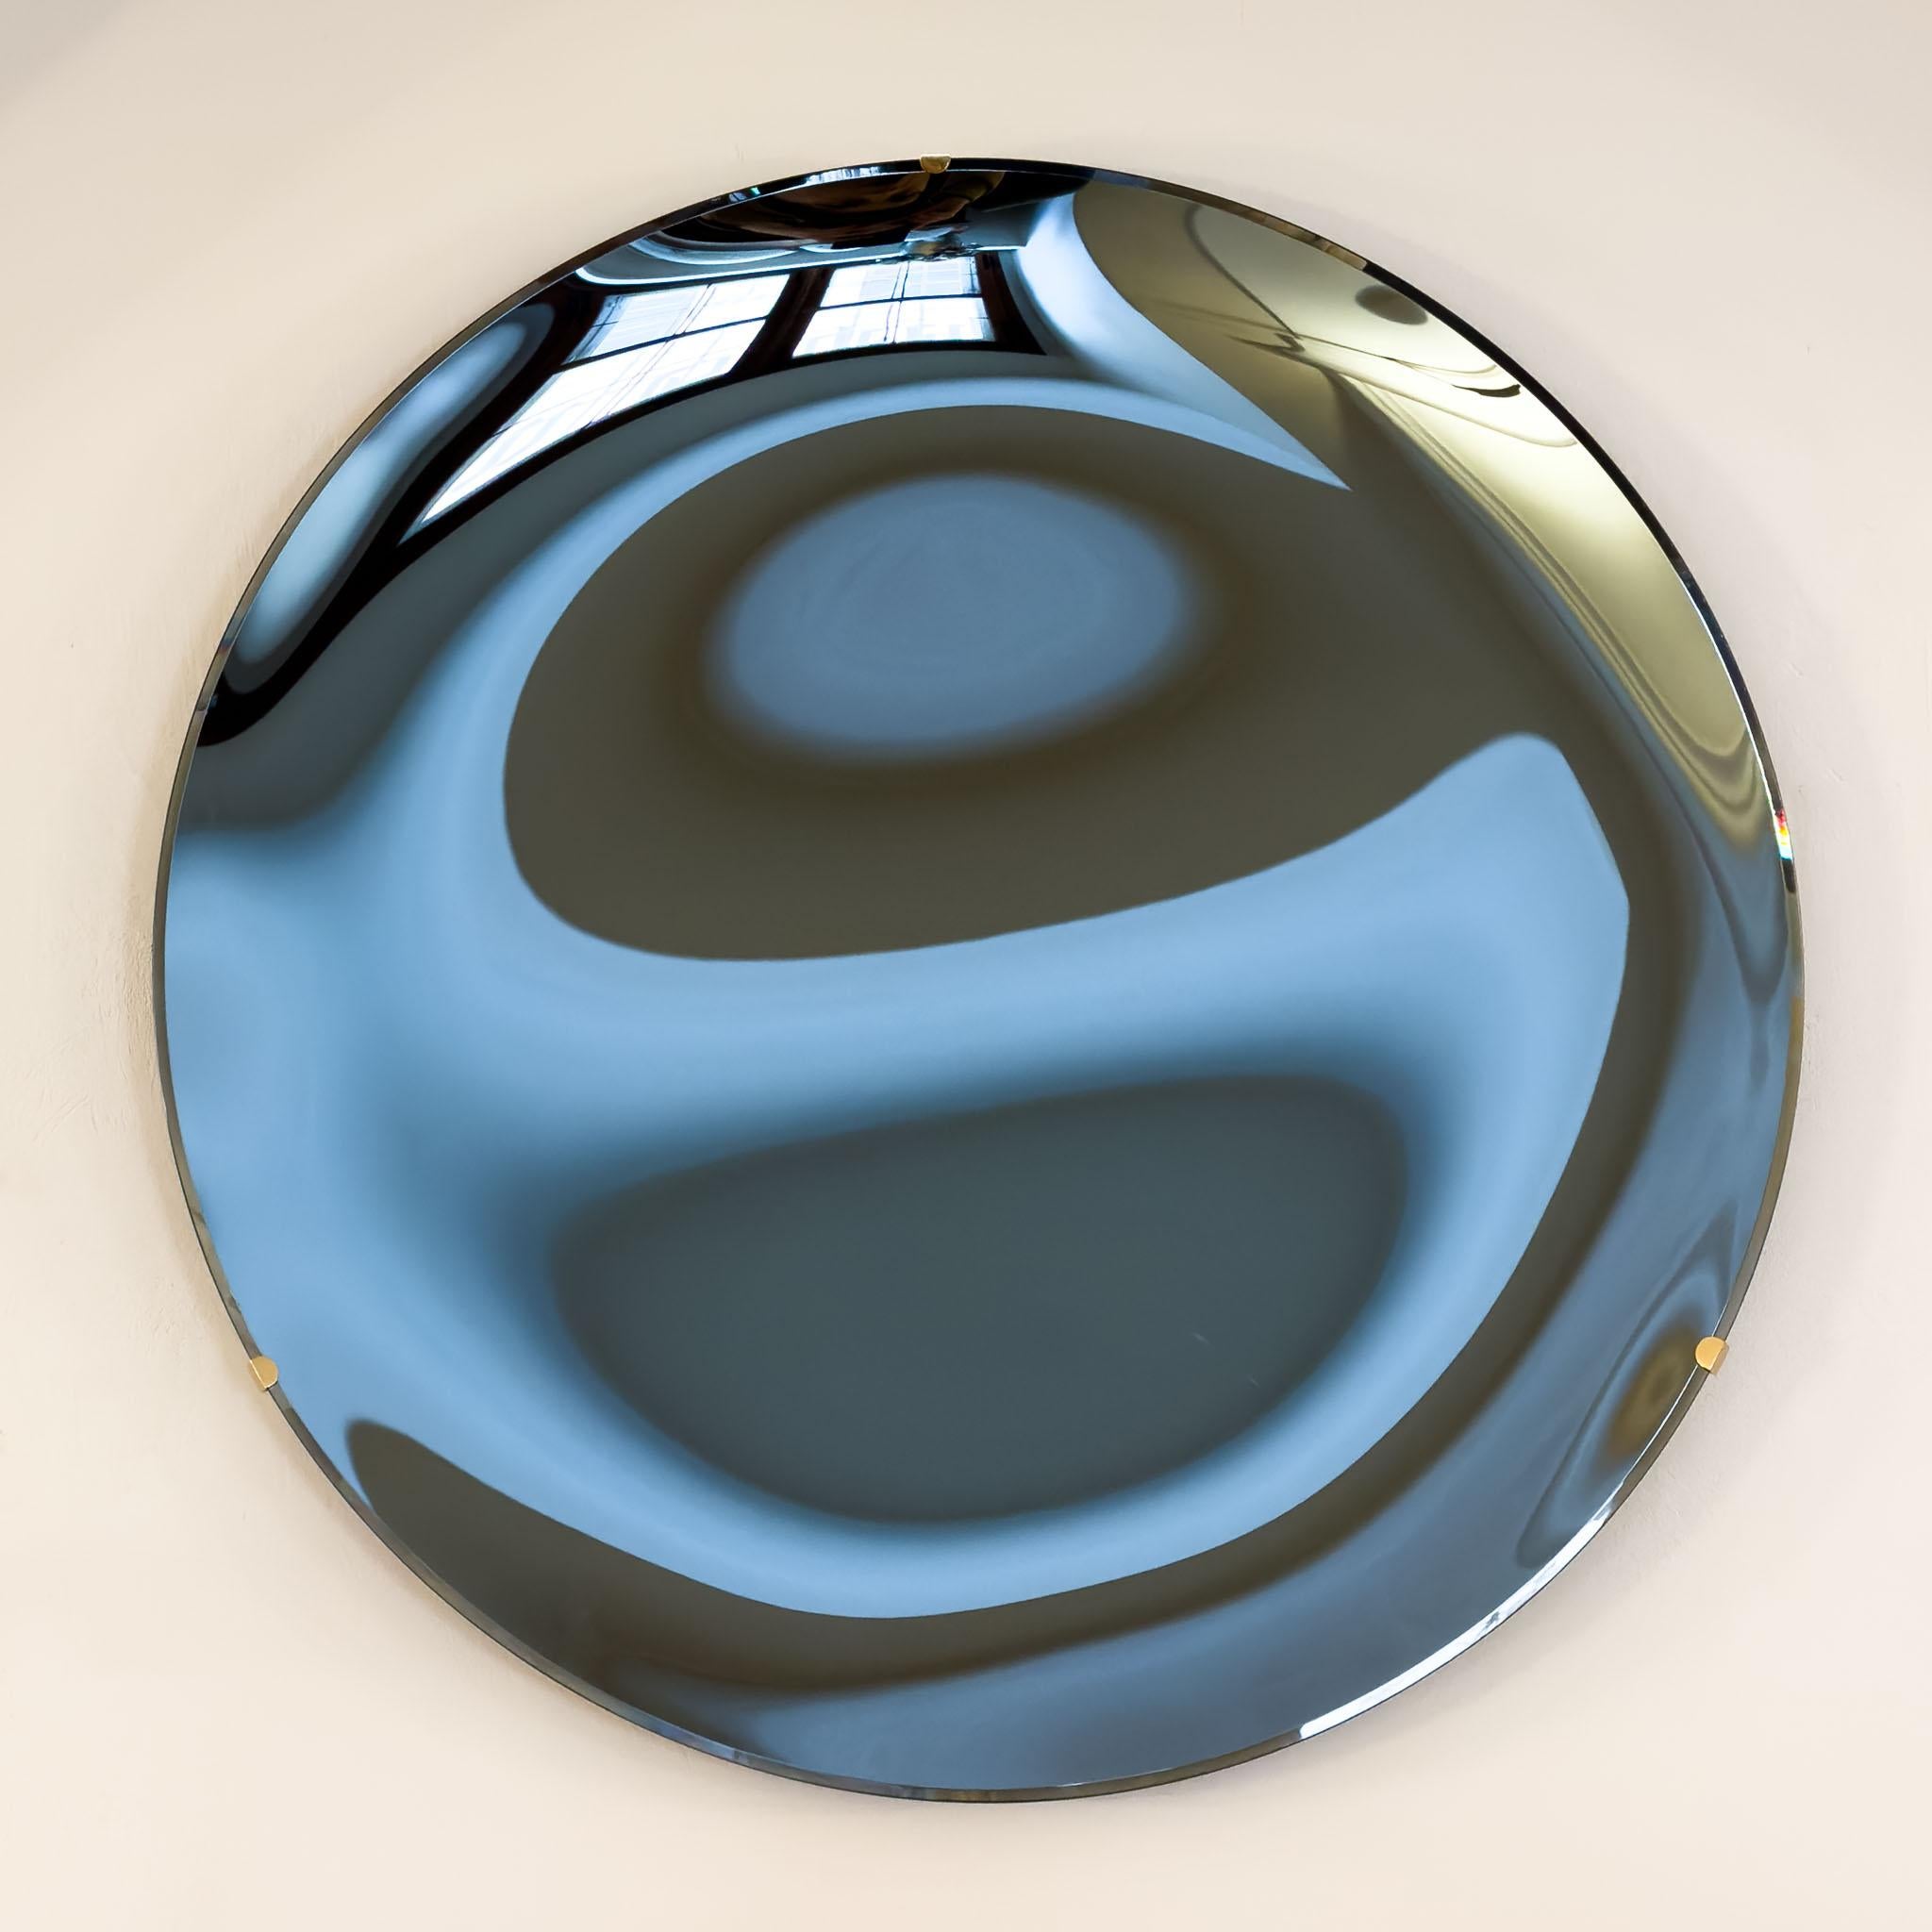 Large round wall mirror in concave shape with faceted edge. The wall mirror is made of blue glass and is held by a minimalist brass wall bracket.